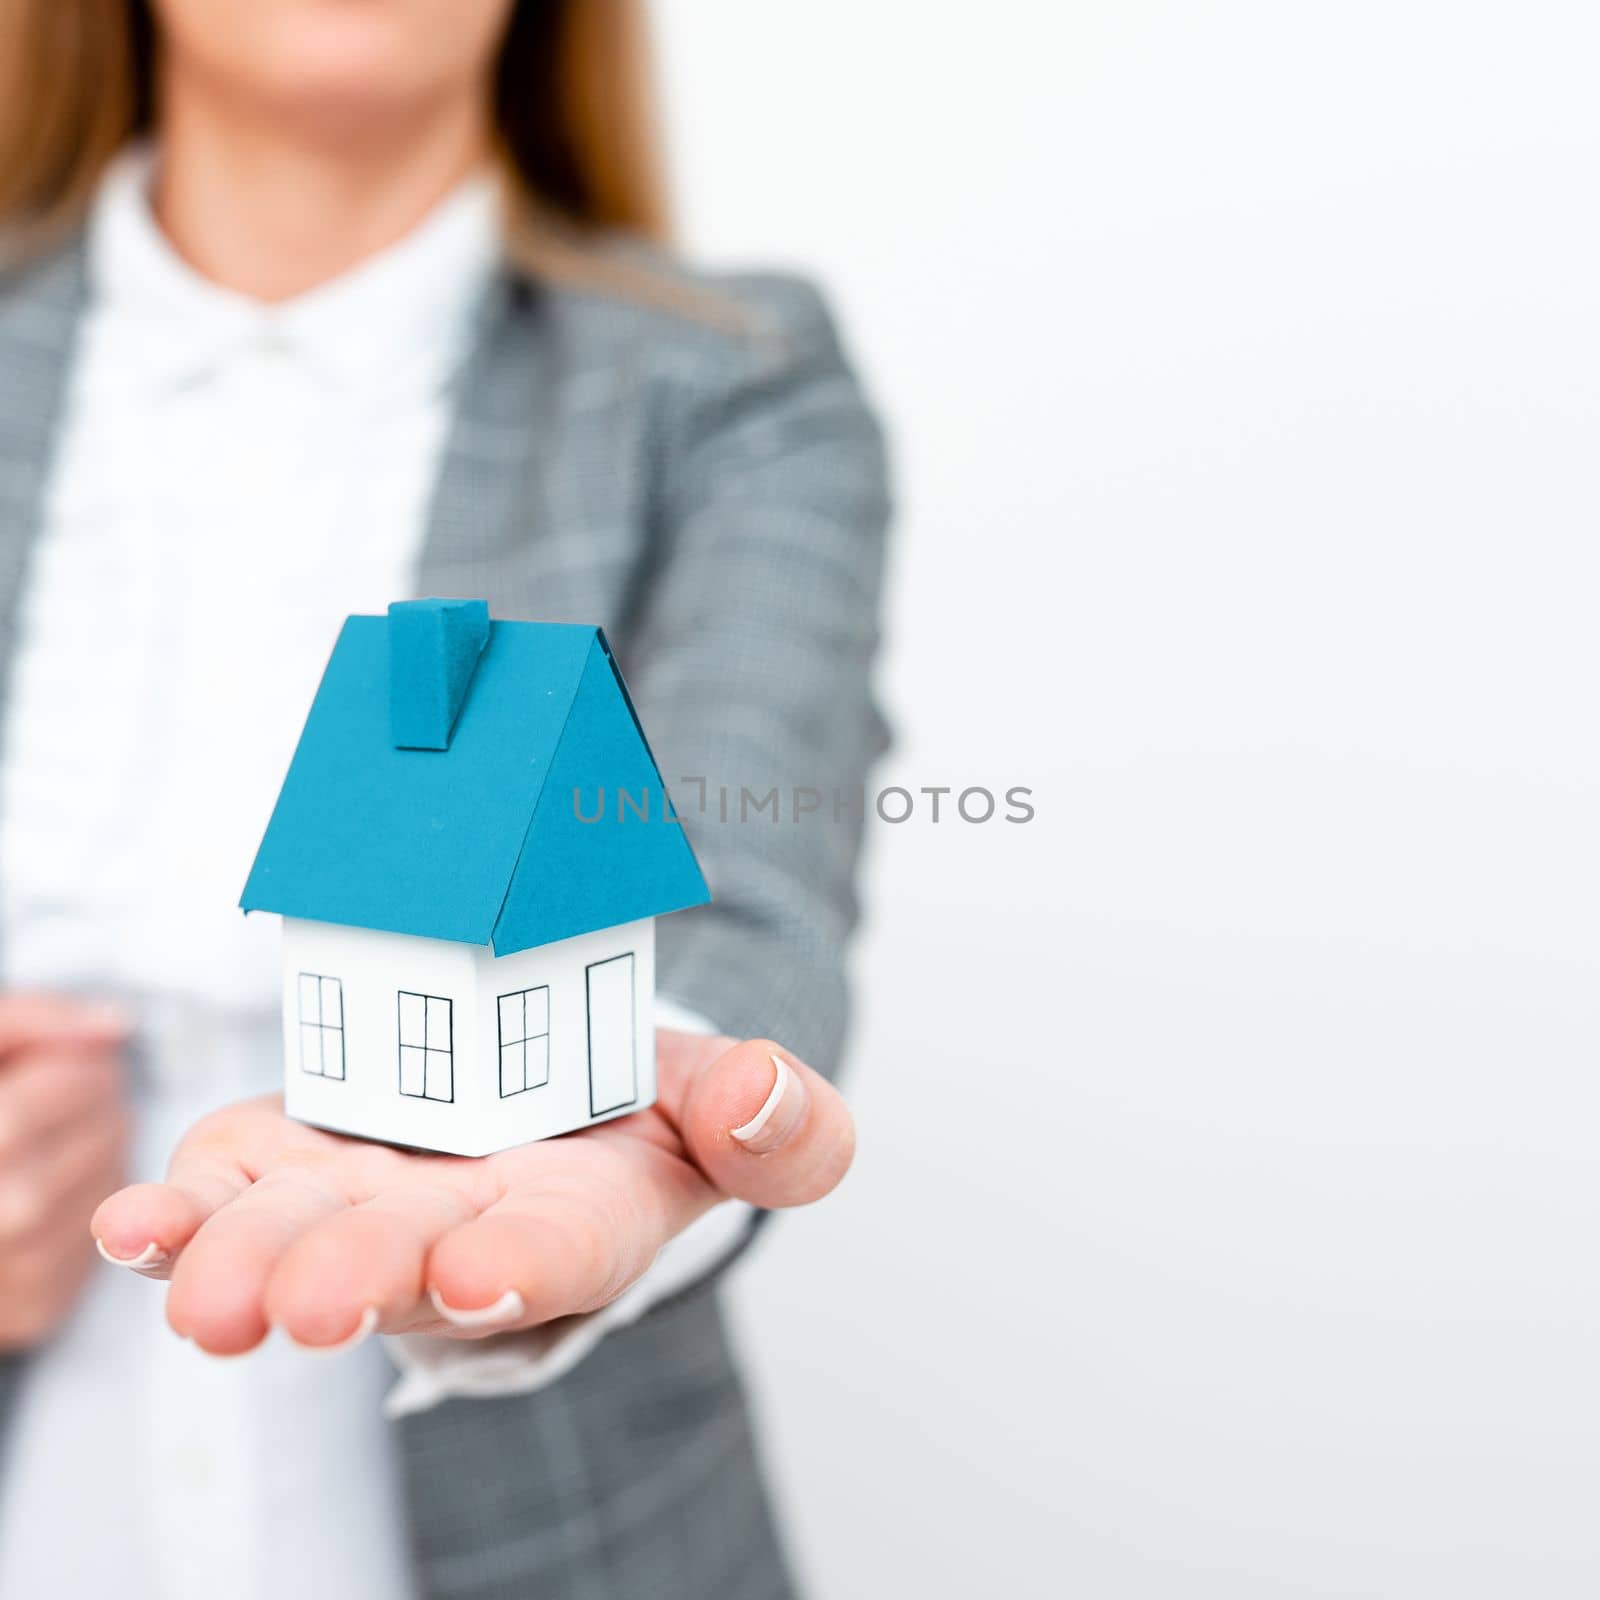 Businesswoman in gray suit holding colored paper house in one hand. Showing Important Informations. Executive Displaying Late News. Woman Showing Recent Updates. by nialowwa